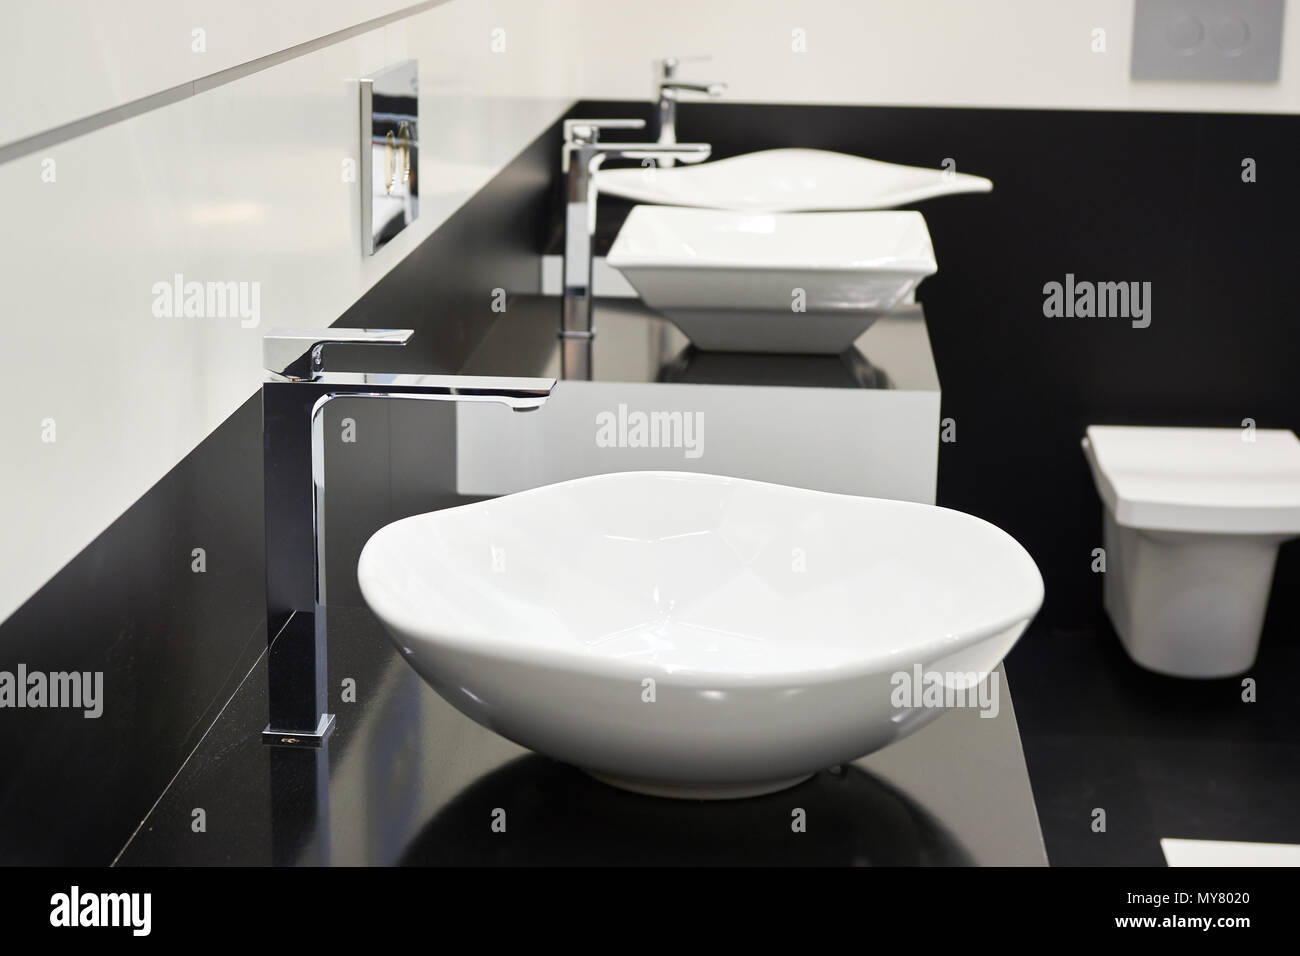 Ceramic sink with faucets in public toilet Stock Photo